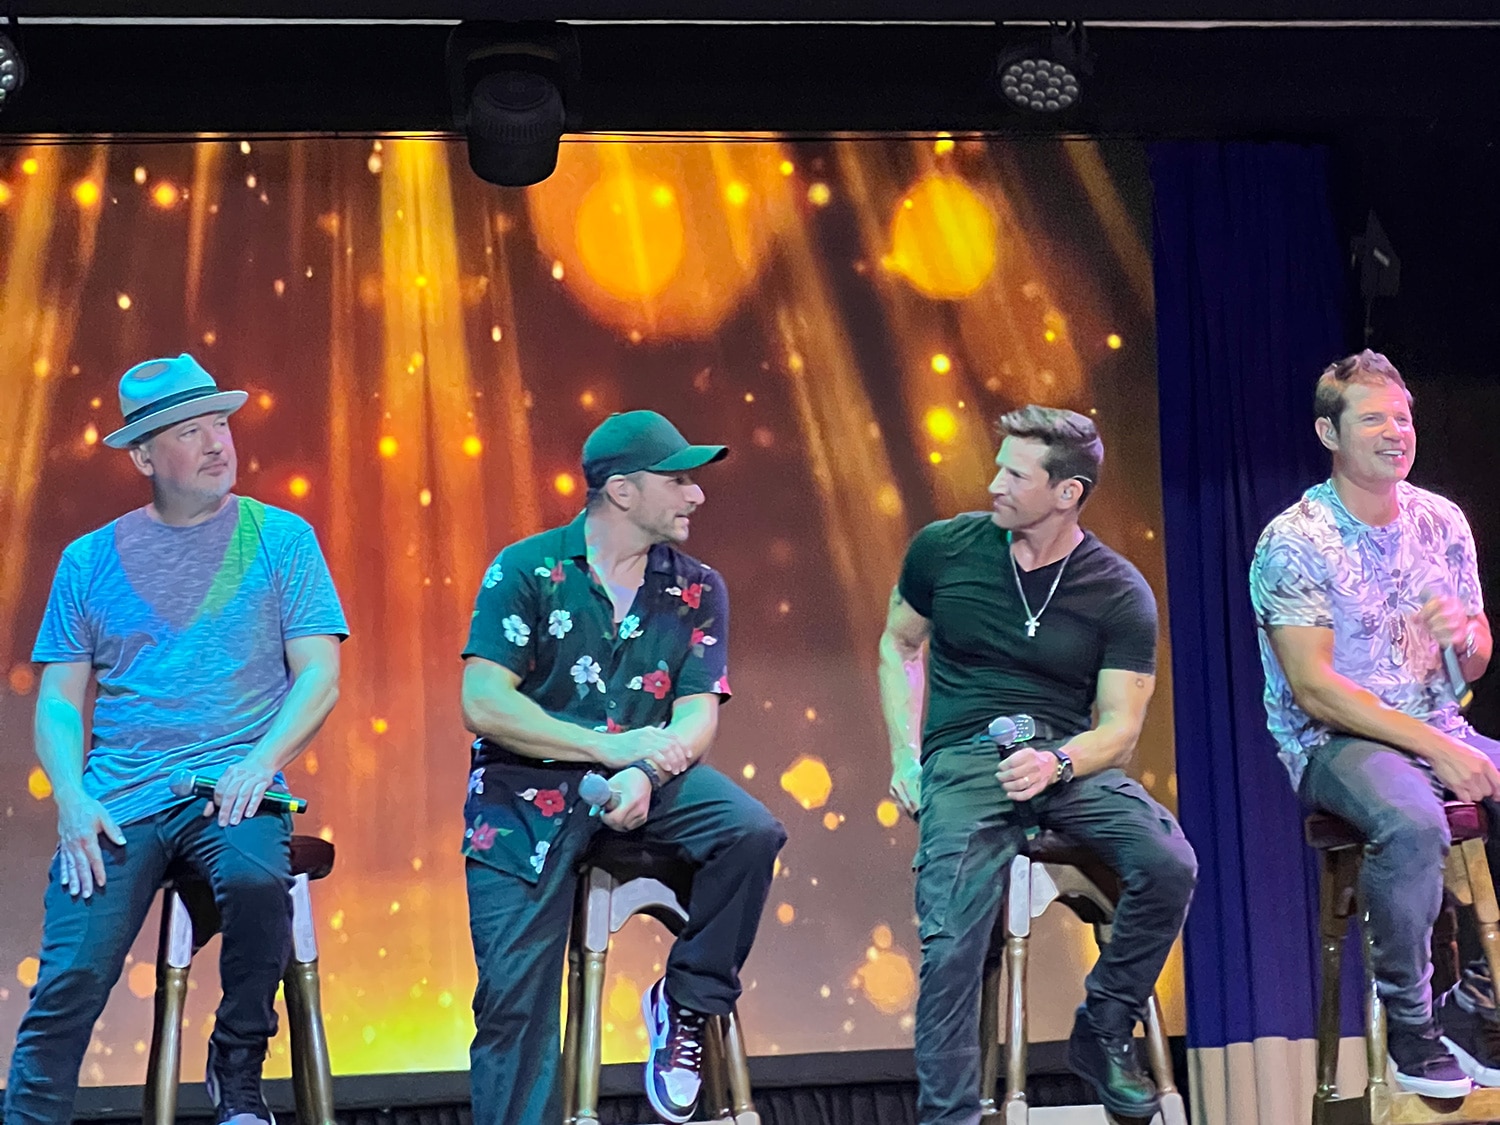 98 Degrees on stage for a performance at Beaches Turks and Caicos.